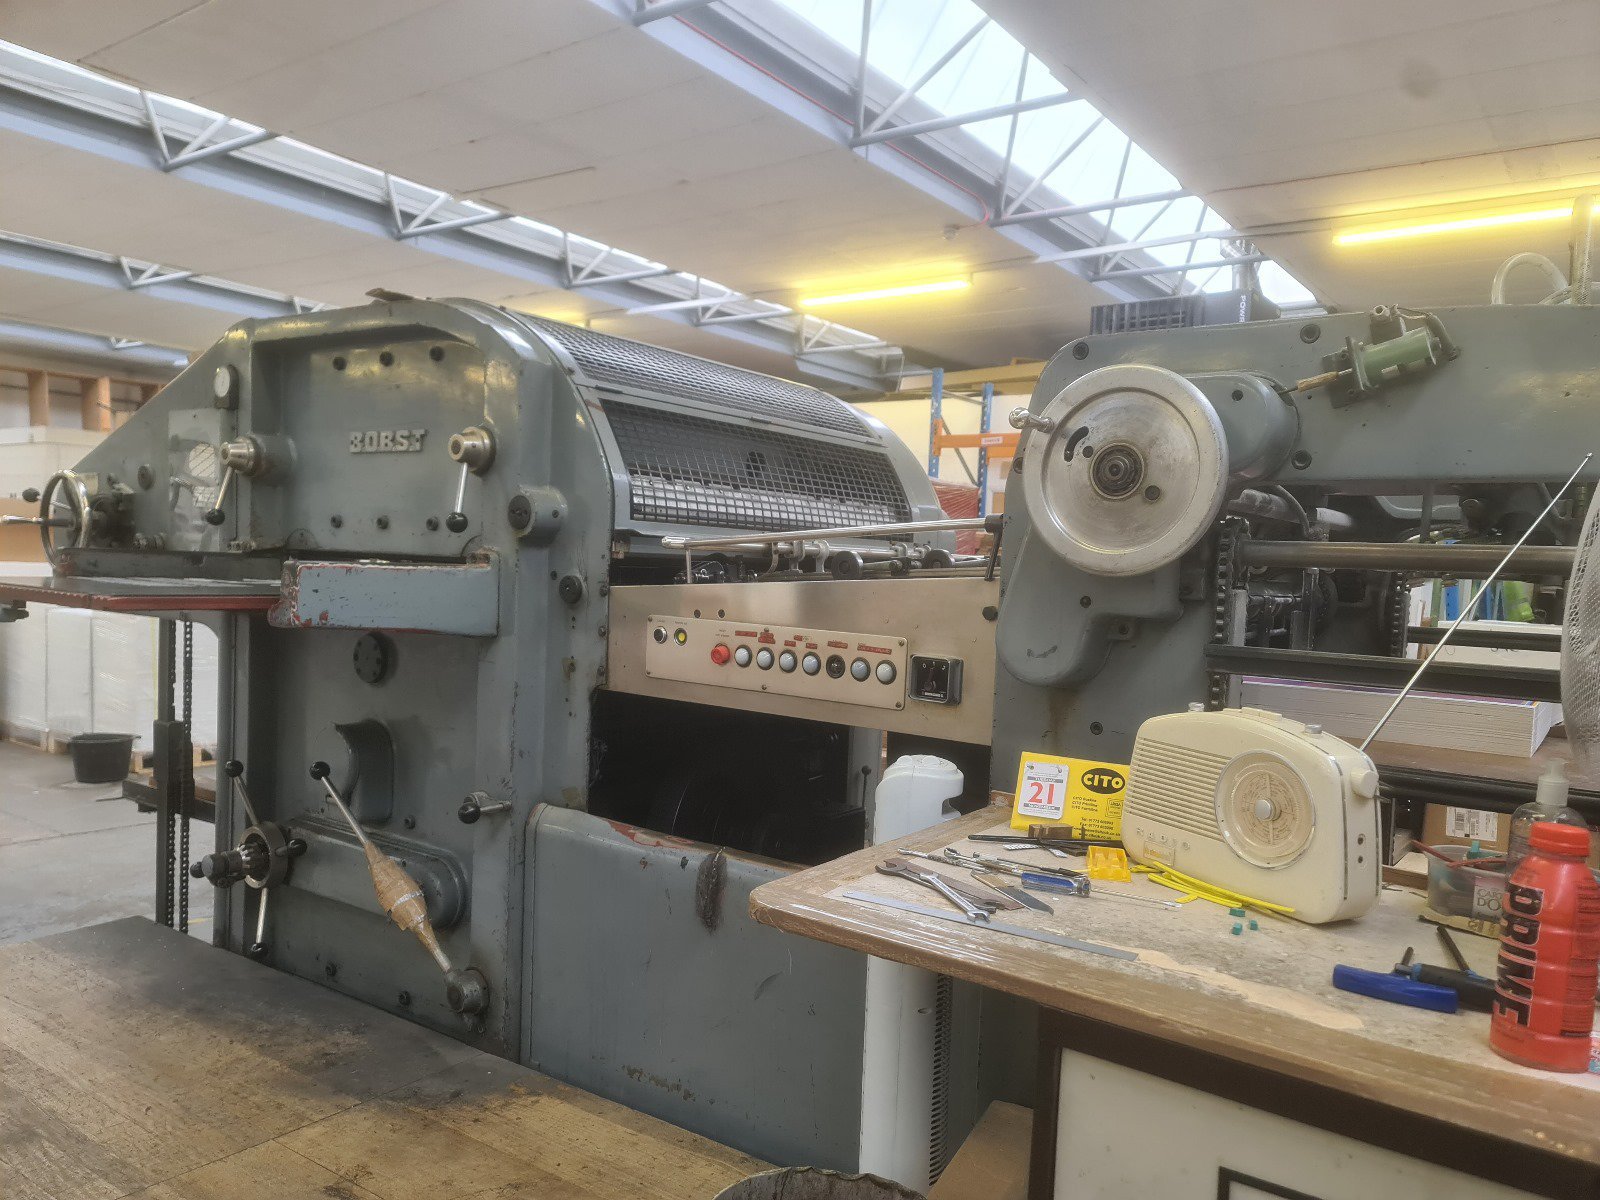 Offer 371392, a BOBST SP 1080 from 1960